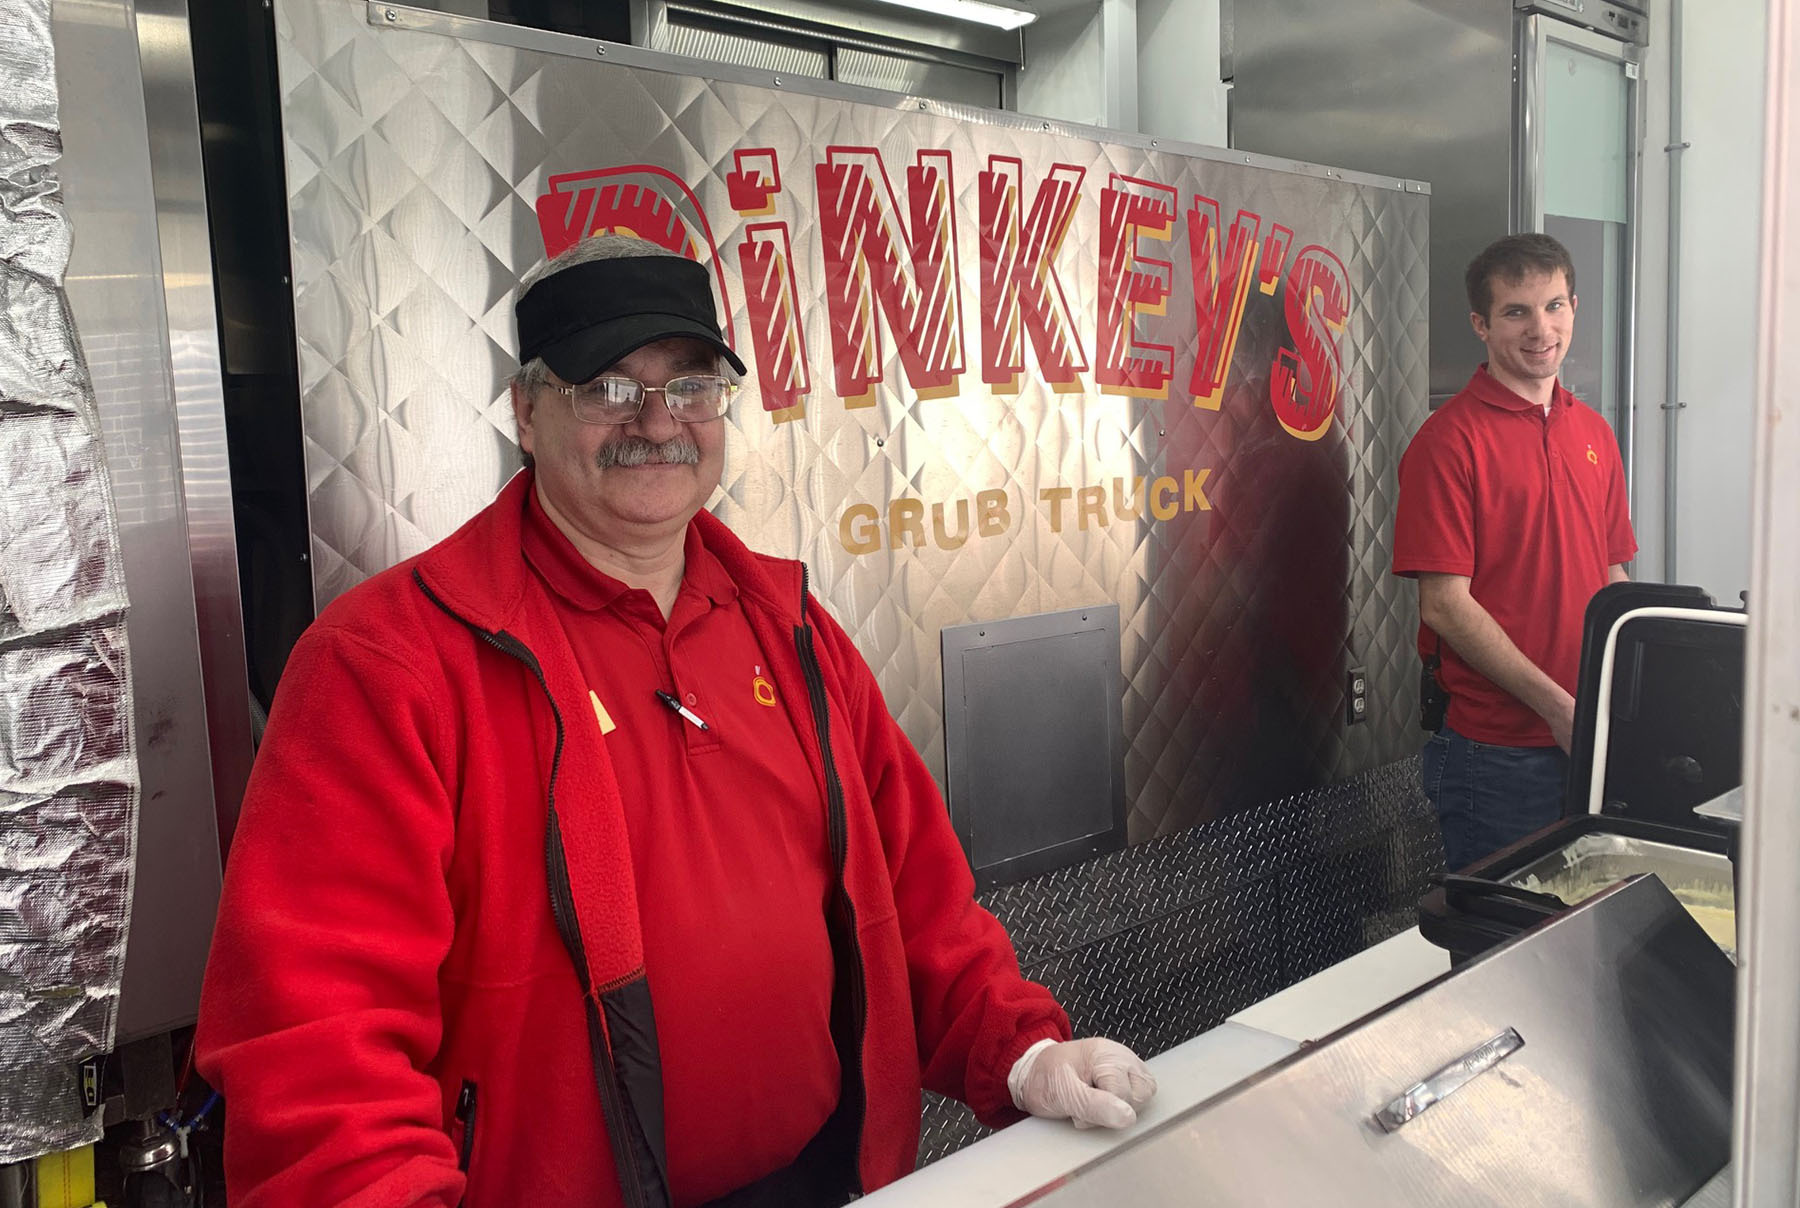 Food service managers in the Dinkey's food truck